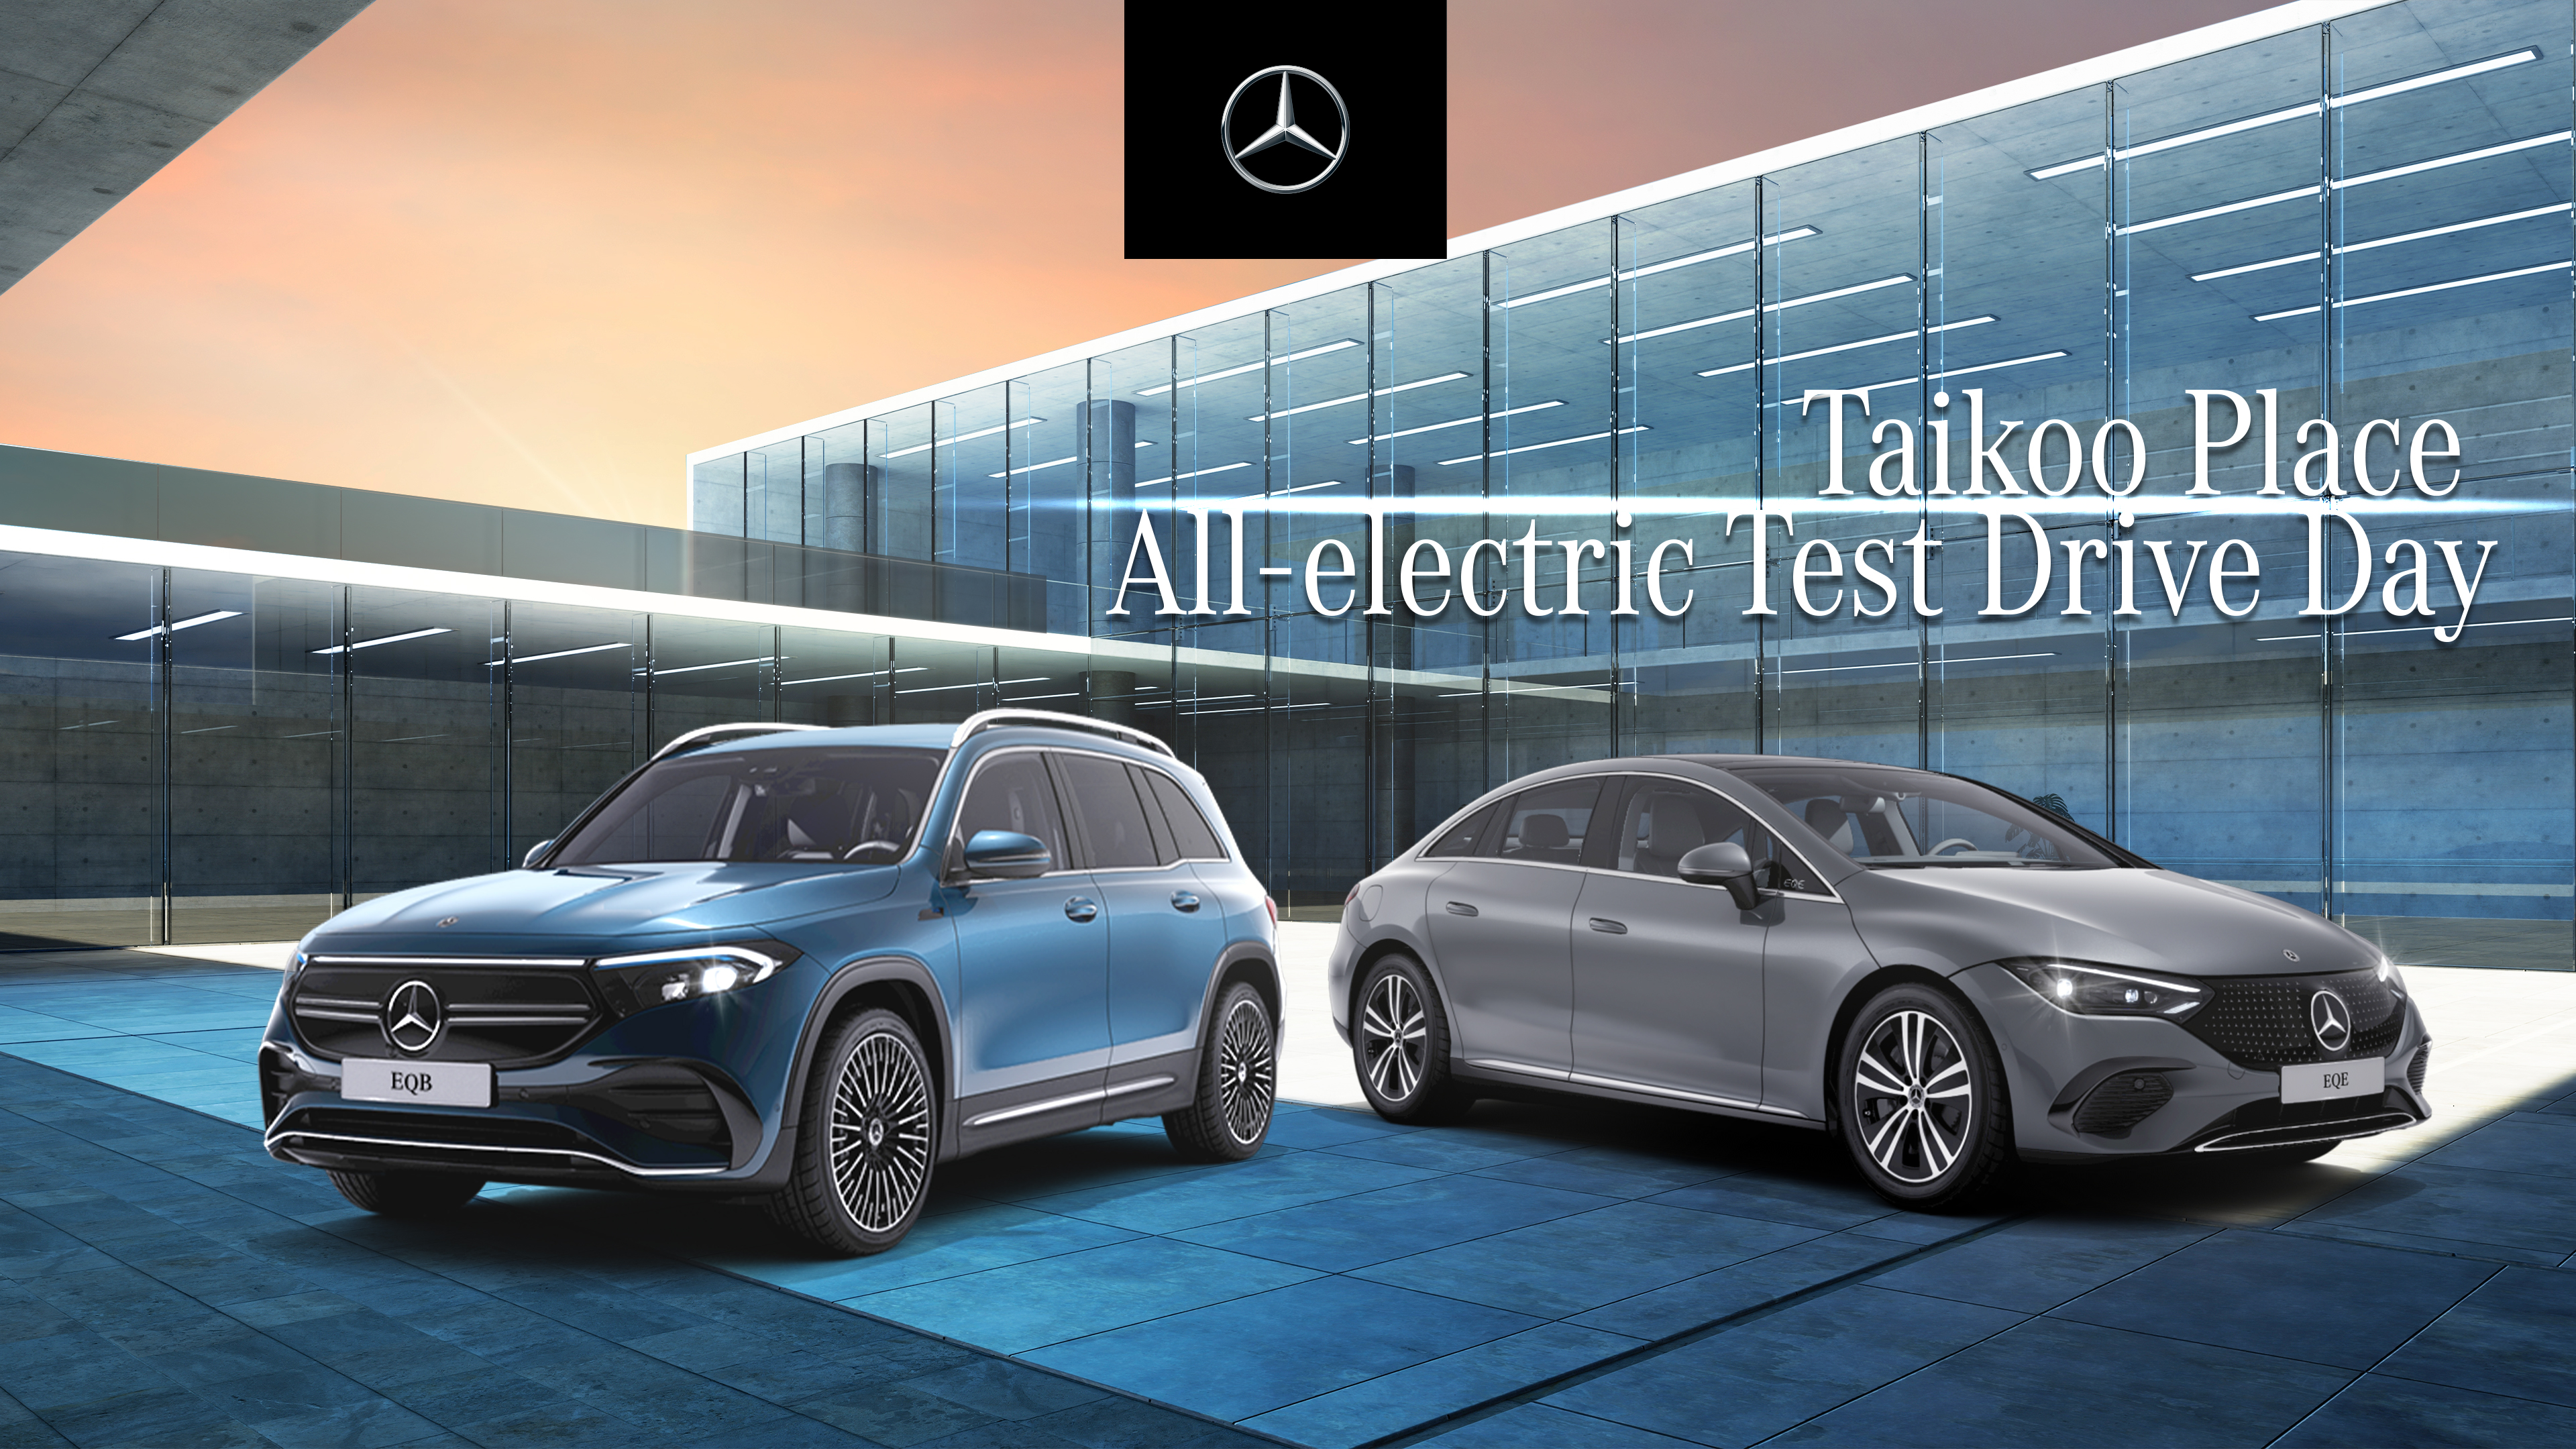 Taikoo Place All-electric Test Drive Day